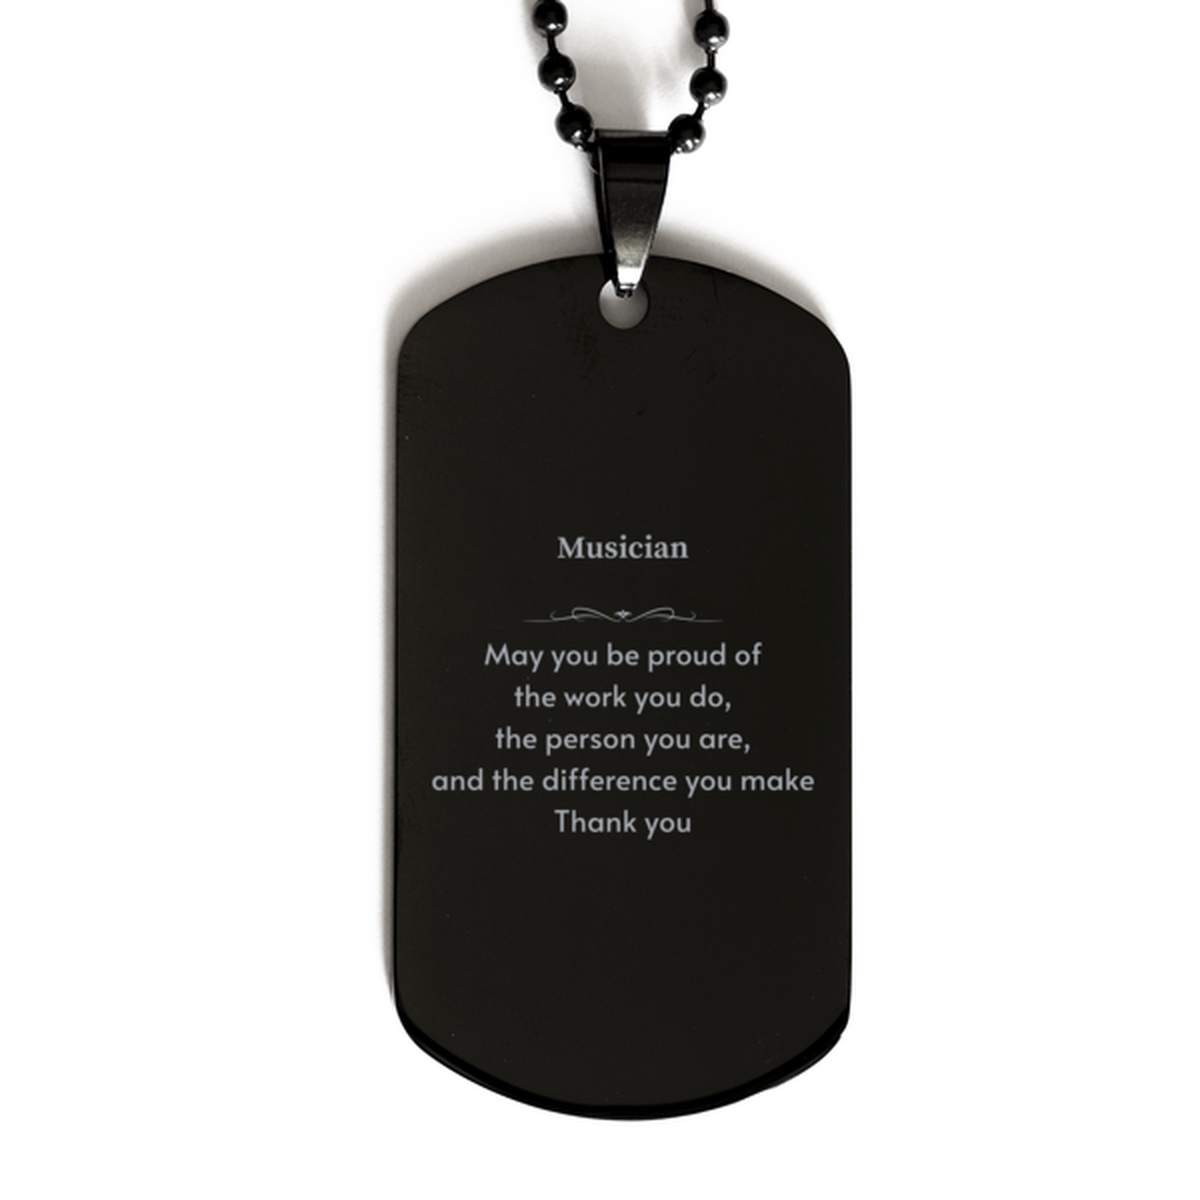 Heartwarming Black Dog Tag Retirement Coworkers Gifts for Musician, Musician May You be proud of the work you do, the person you are Gifts for Boss Men Women Friends